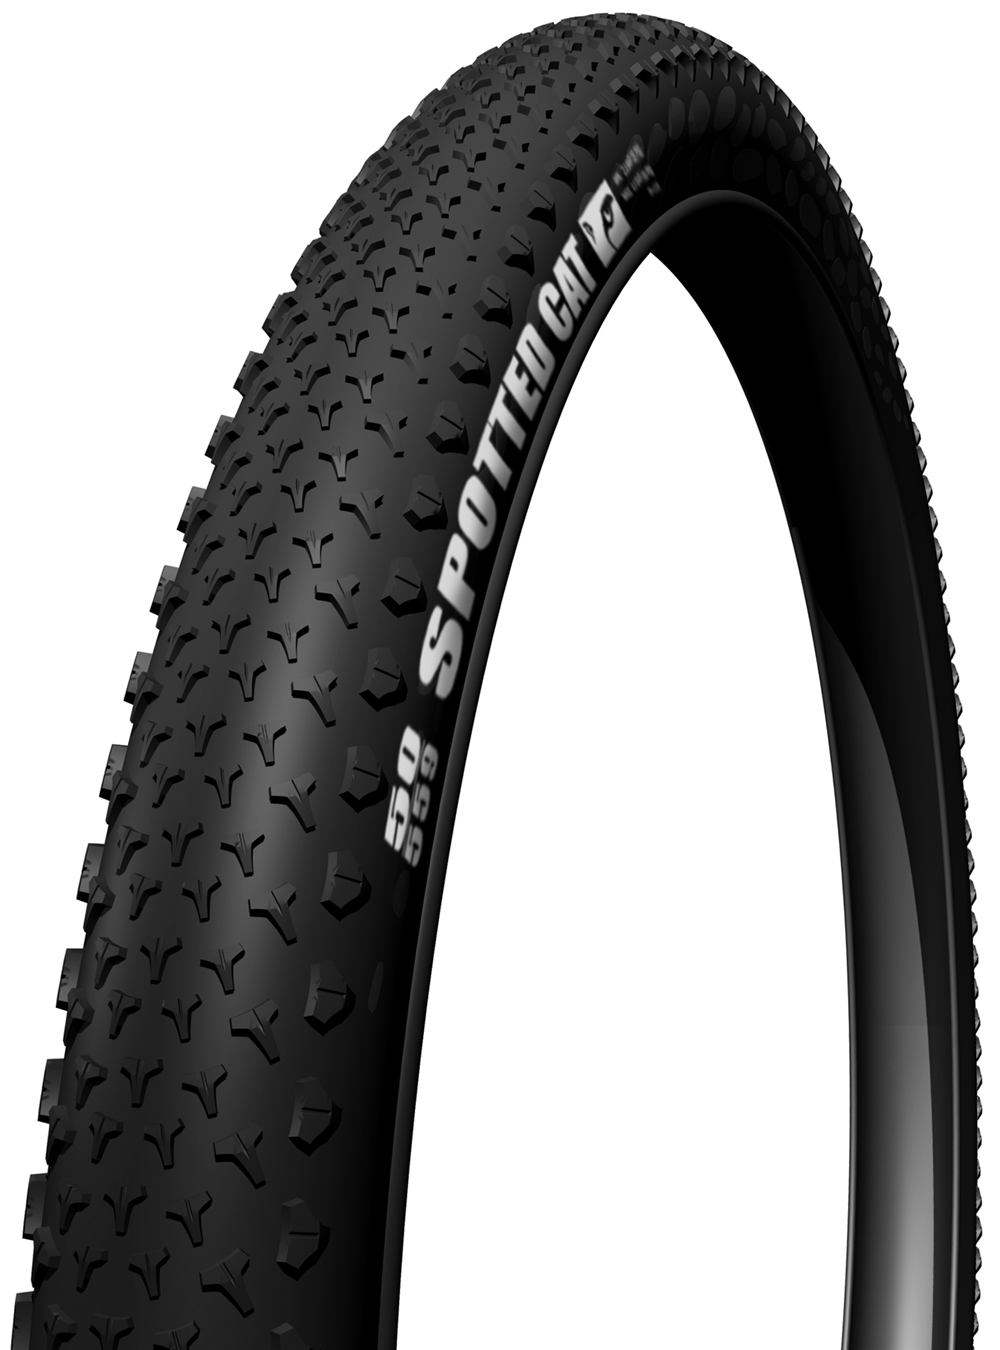 VREDESTEIN Tyre Spotted Cat - UST Tubeless - 26x2.20 Folding Black (26192)